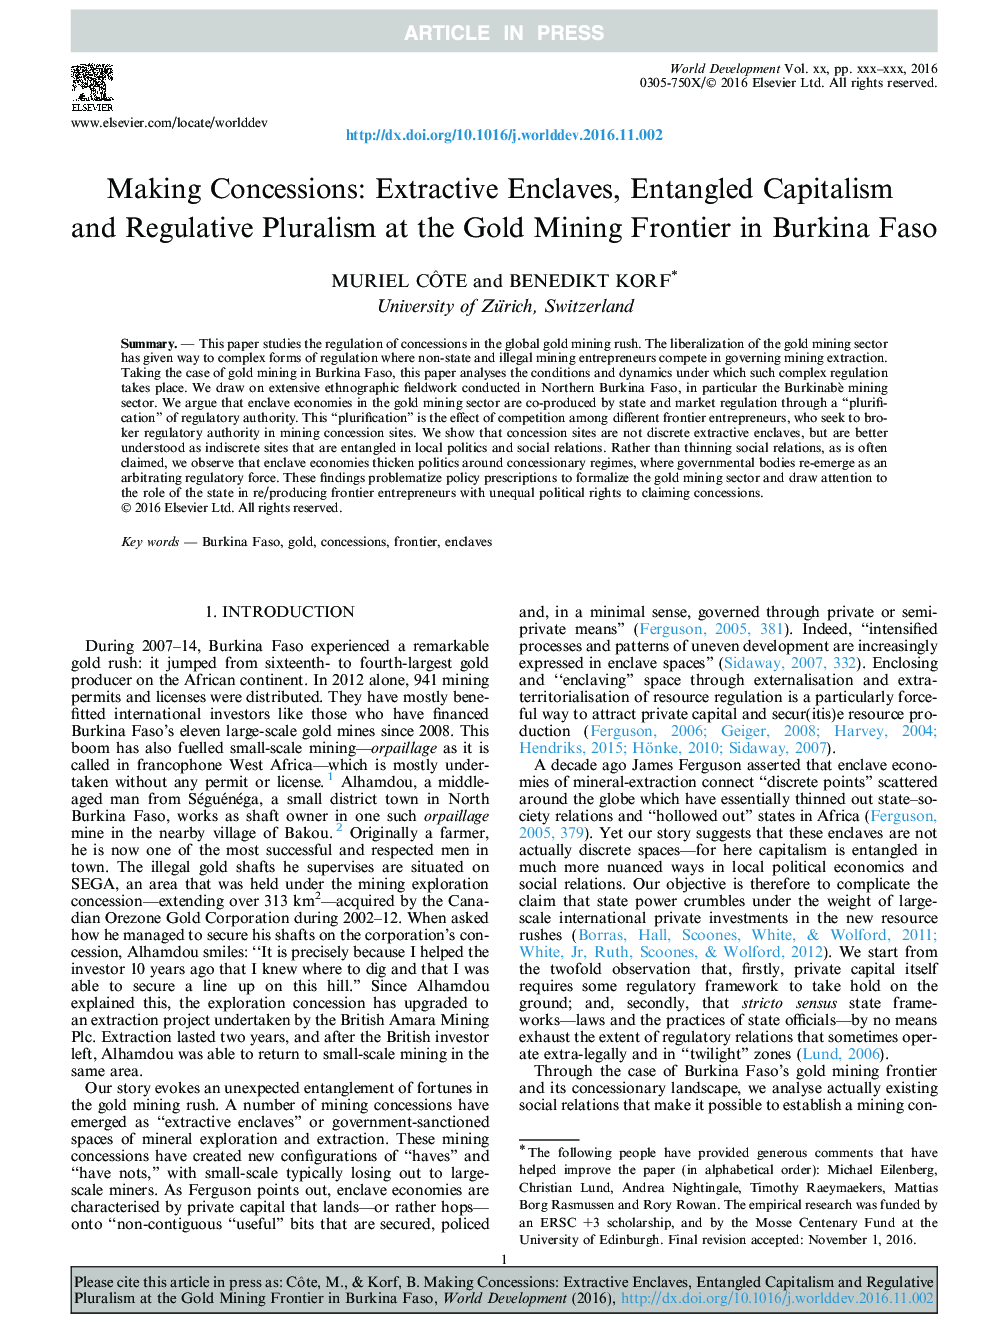 Making Concessions: Extractive Enclaves, Entangled Capitalism and Regulative Pluralism at the Gold Mining Frontier in Burkina Faso